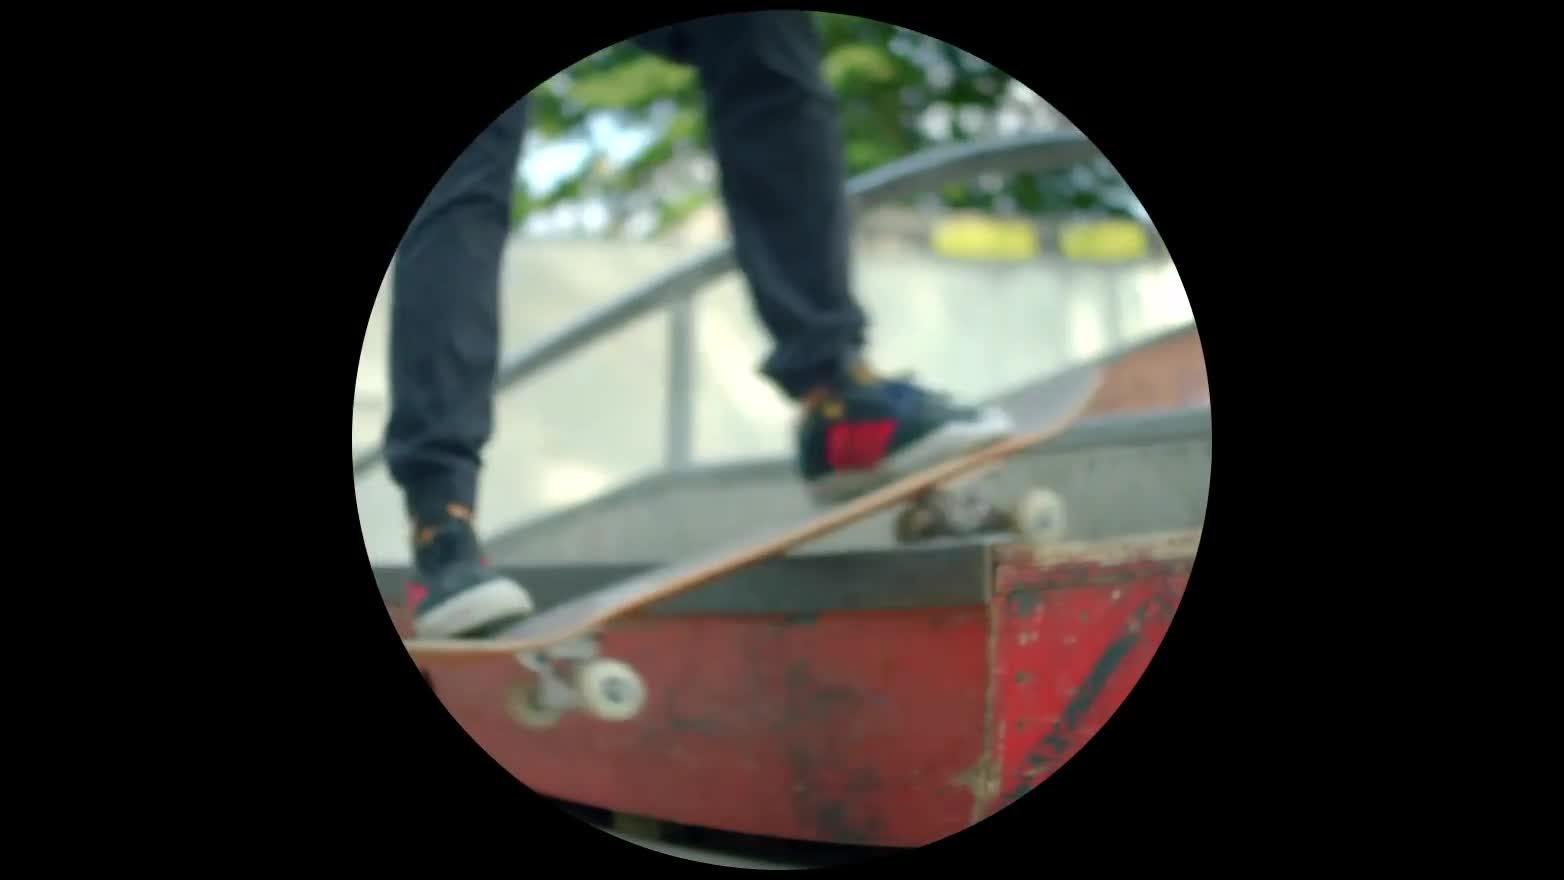 Extracted still image from the same stock video of a skater performing a backside boardslide - 16x9, with fisheye effect added with FFmpeg